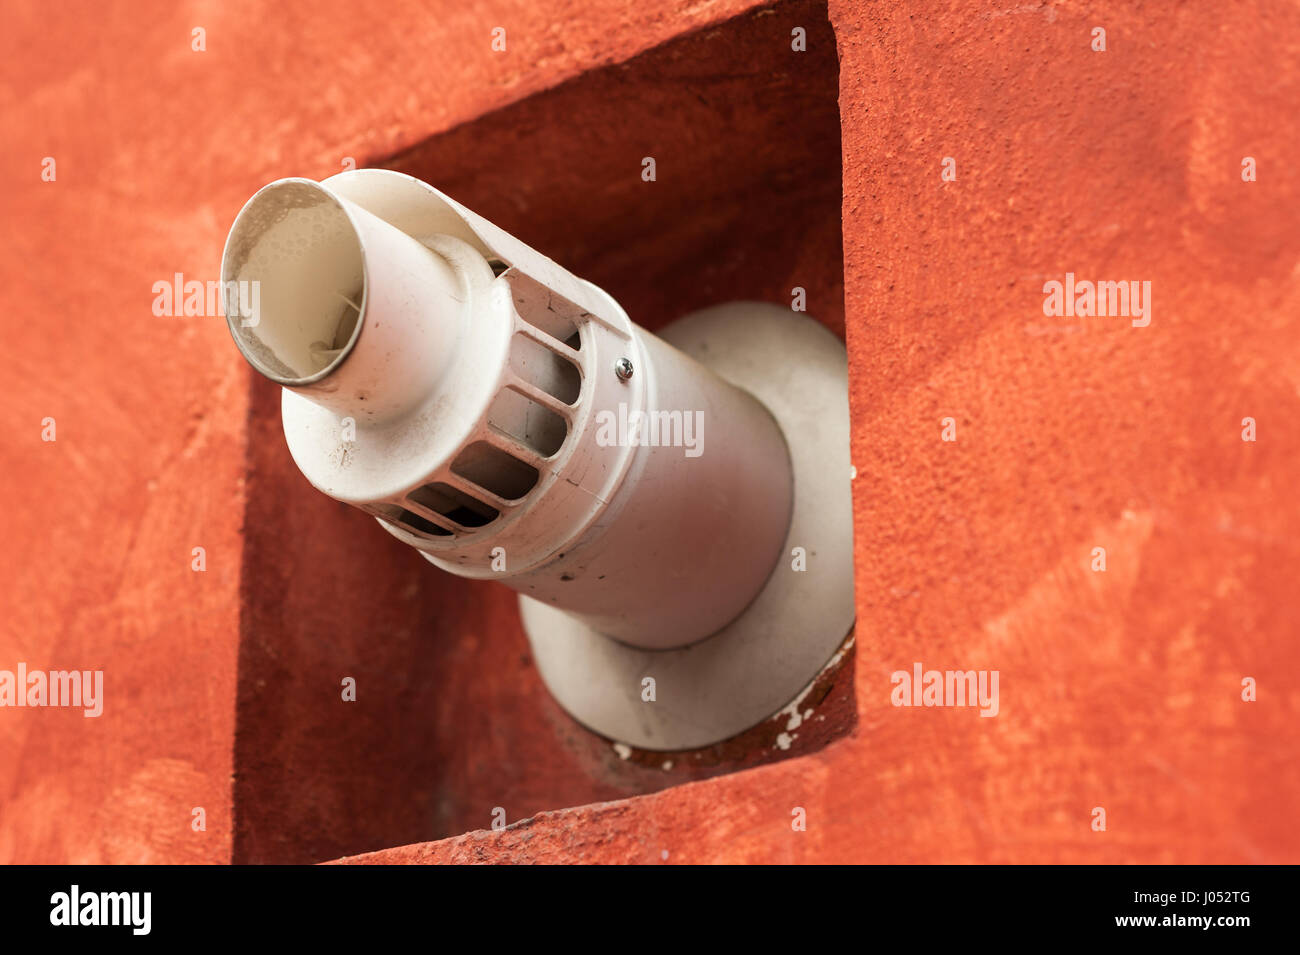 Chimney for smoke outlet on the wall. Forced circulation airtight double boiler. Outdoor flue and air intake. Stock Photo